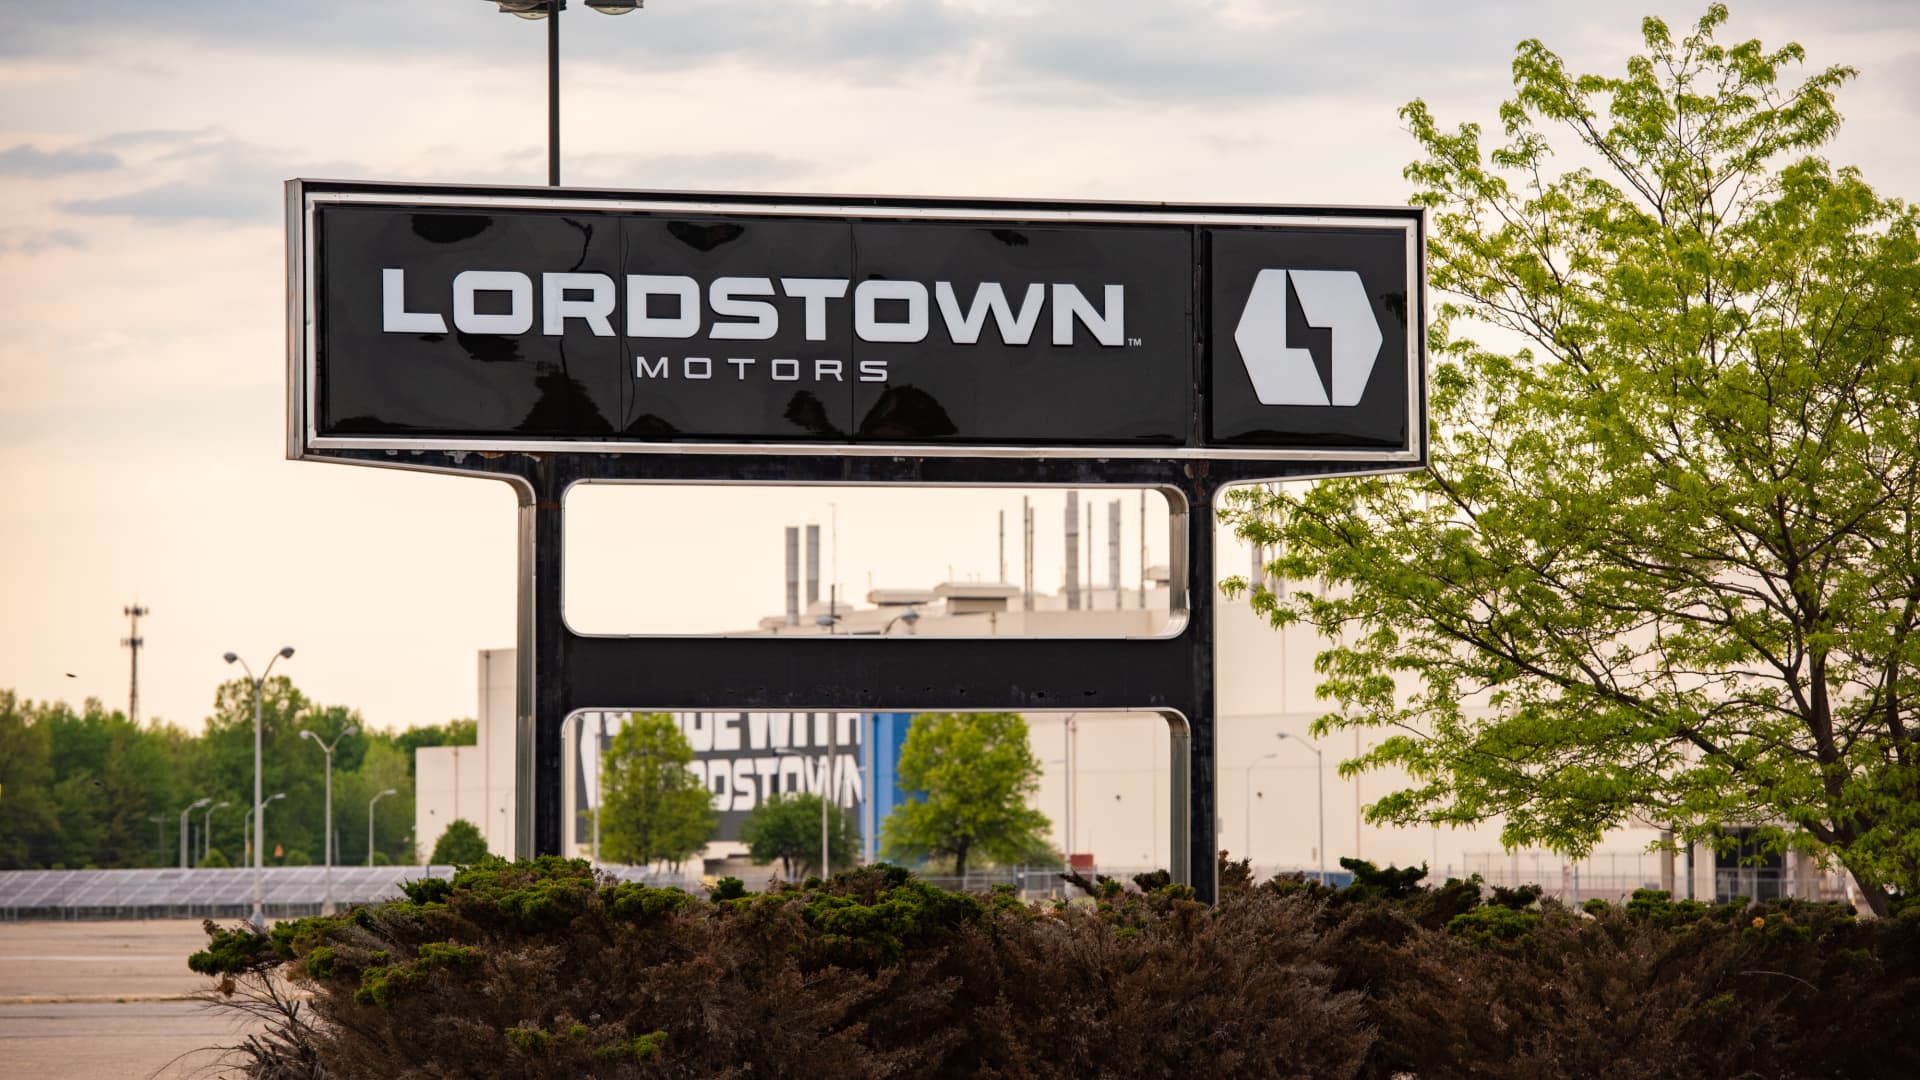 Lordstown Motors (RIDE) Q4 2022 results and EV deliveries